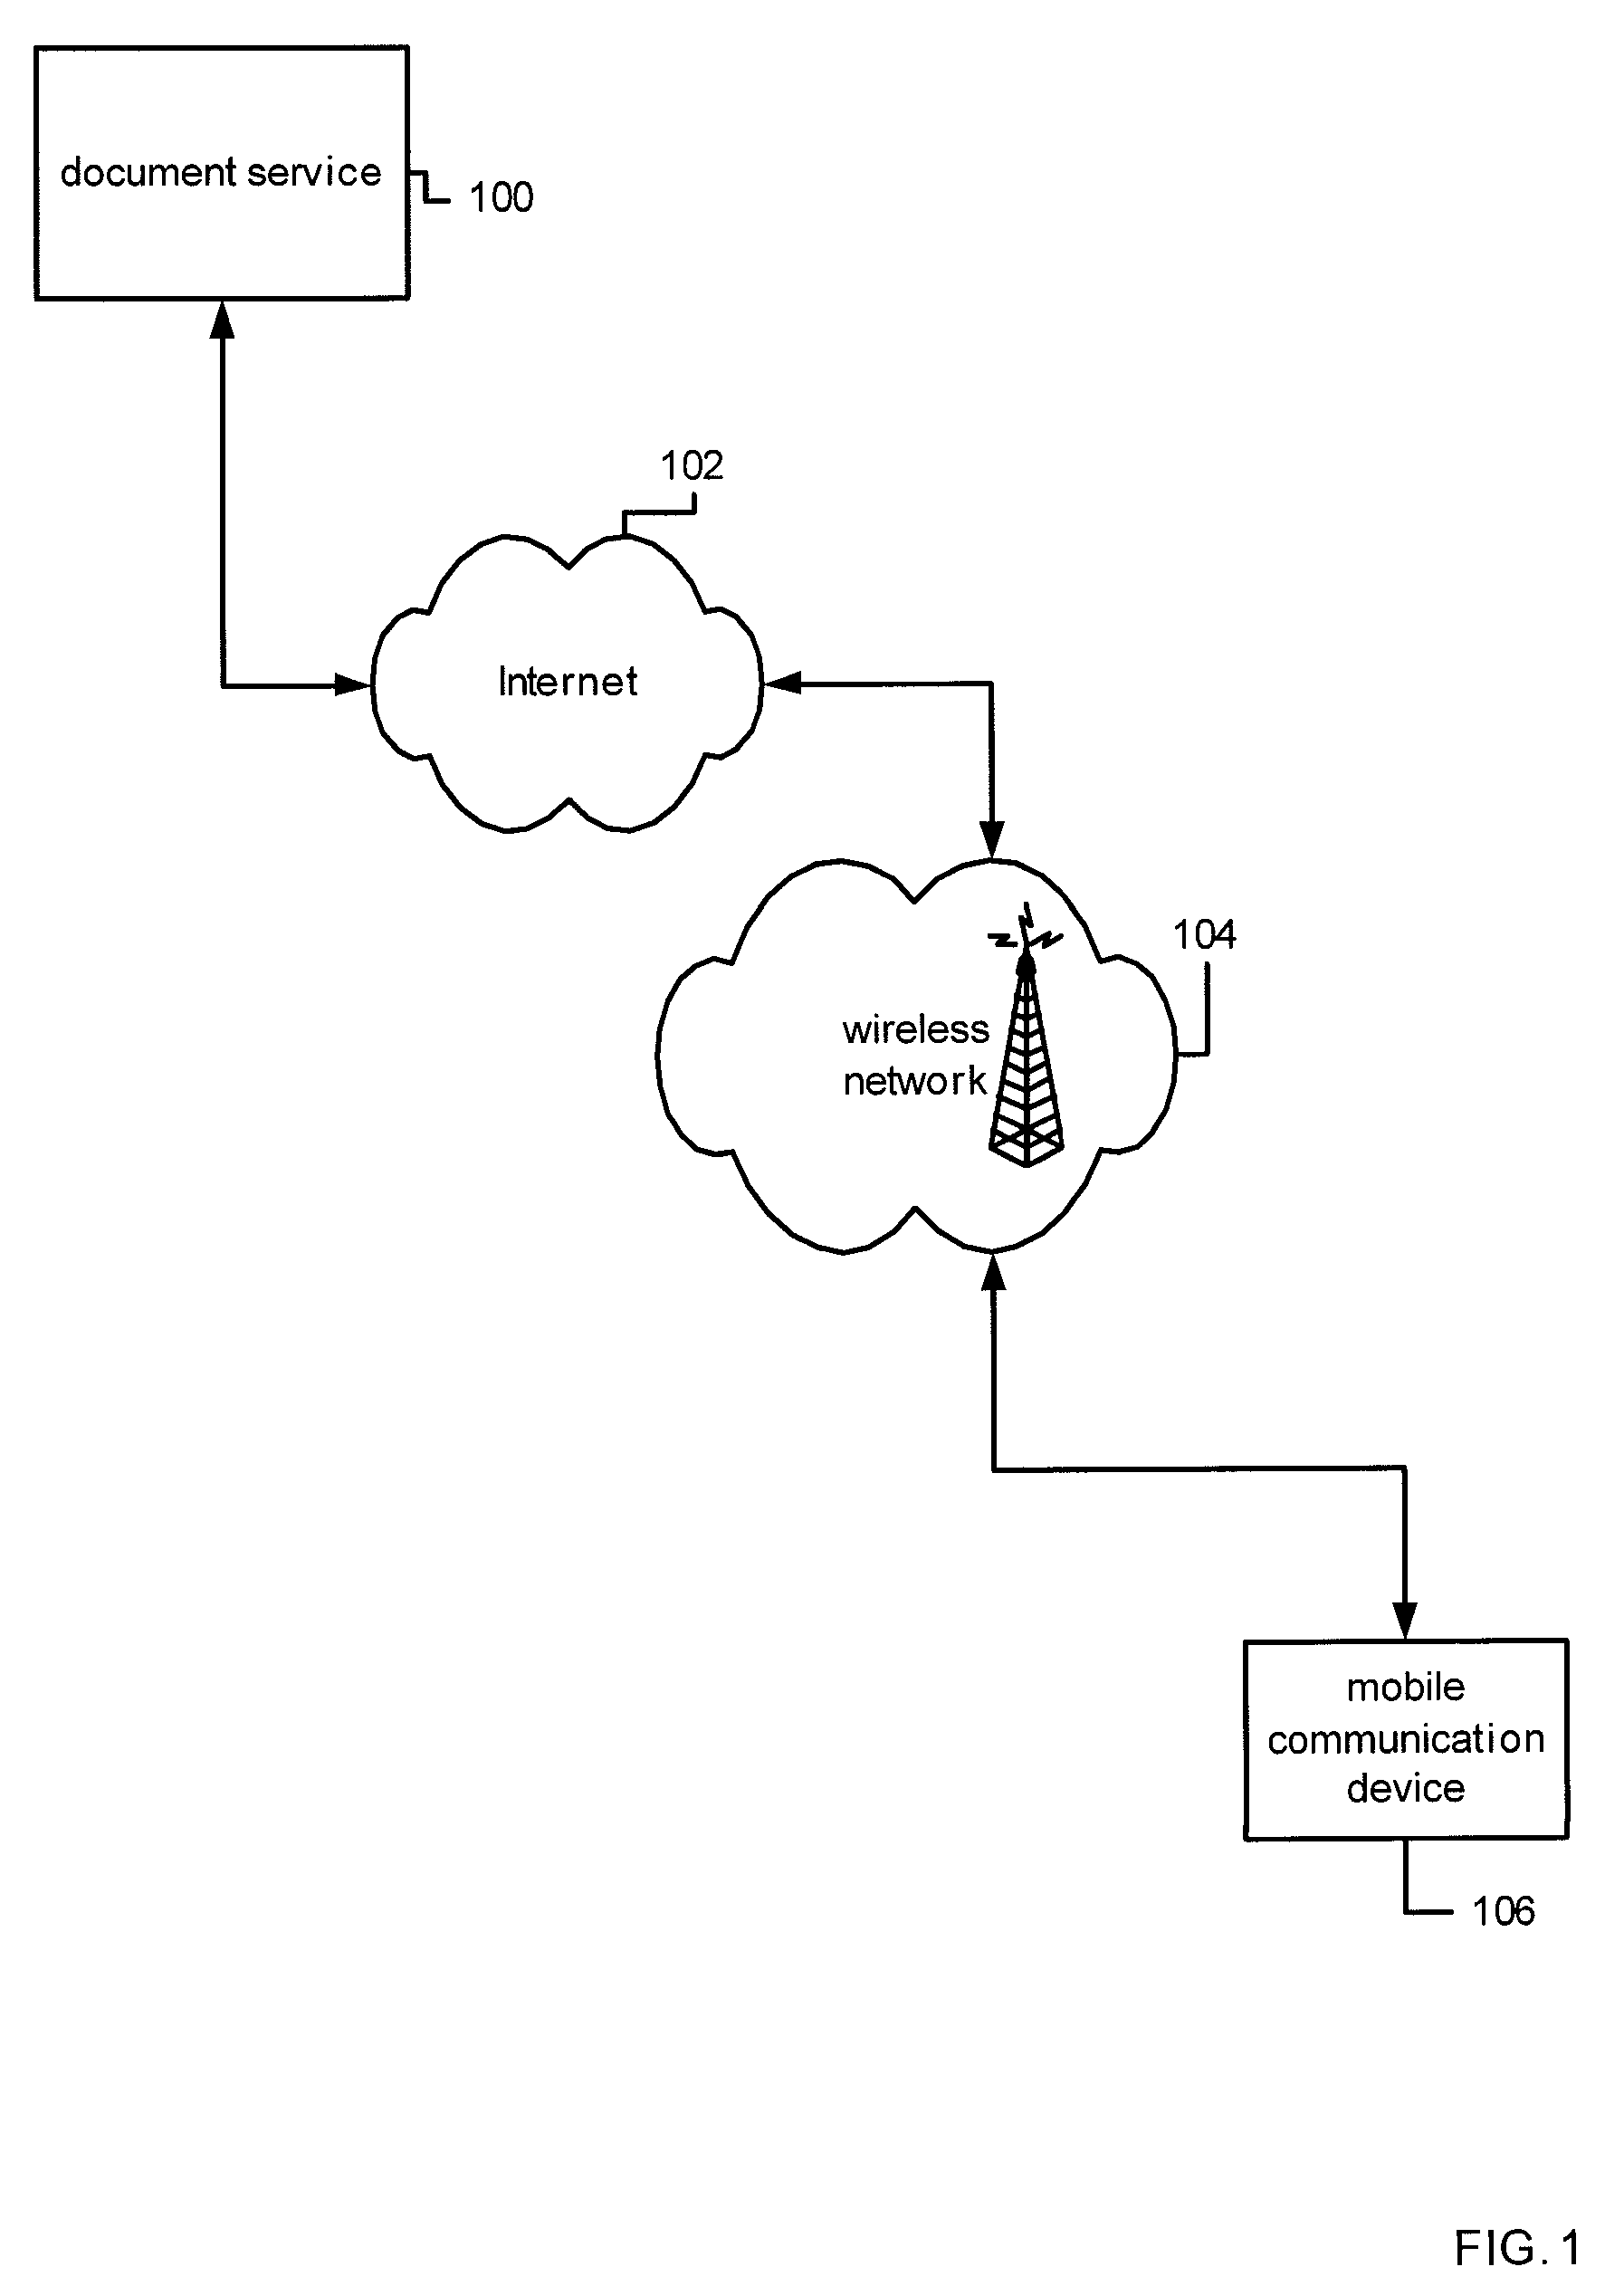 Methods and apparatus for summarizing document content for mobile communication devices